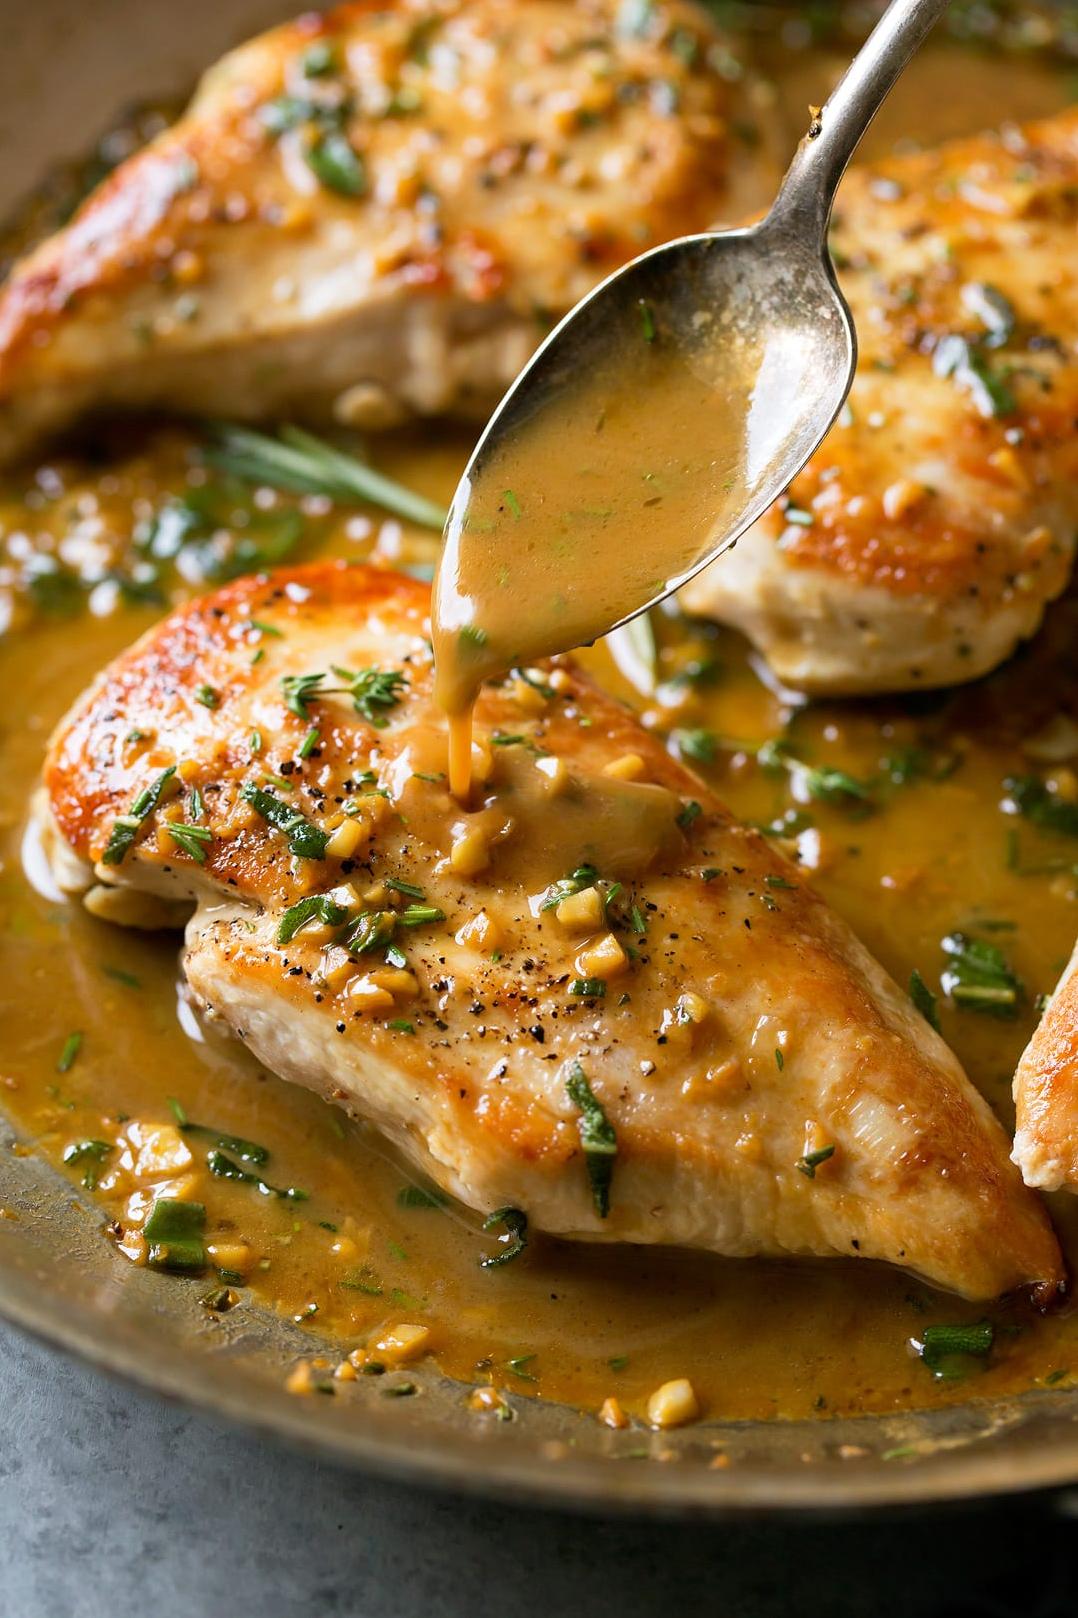  The perfect dinner party dish - Chicken Breasts Sauteed in Butter With Brown Wine Sauce.